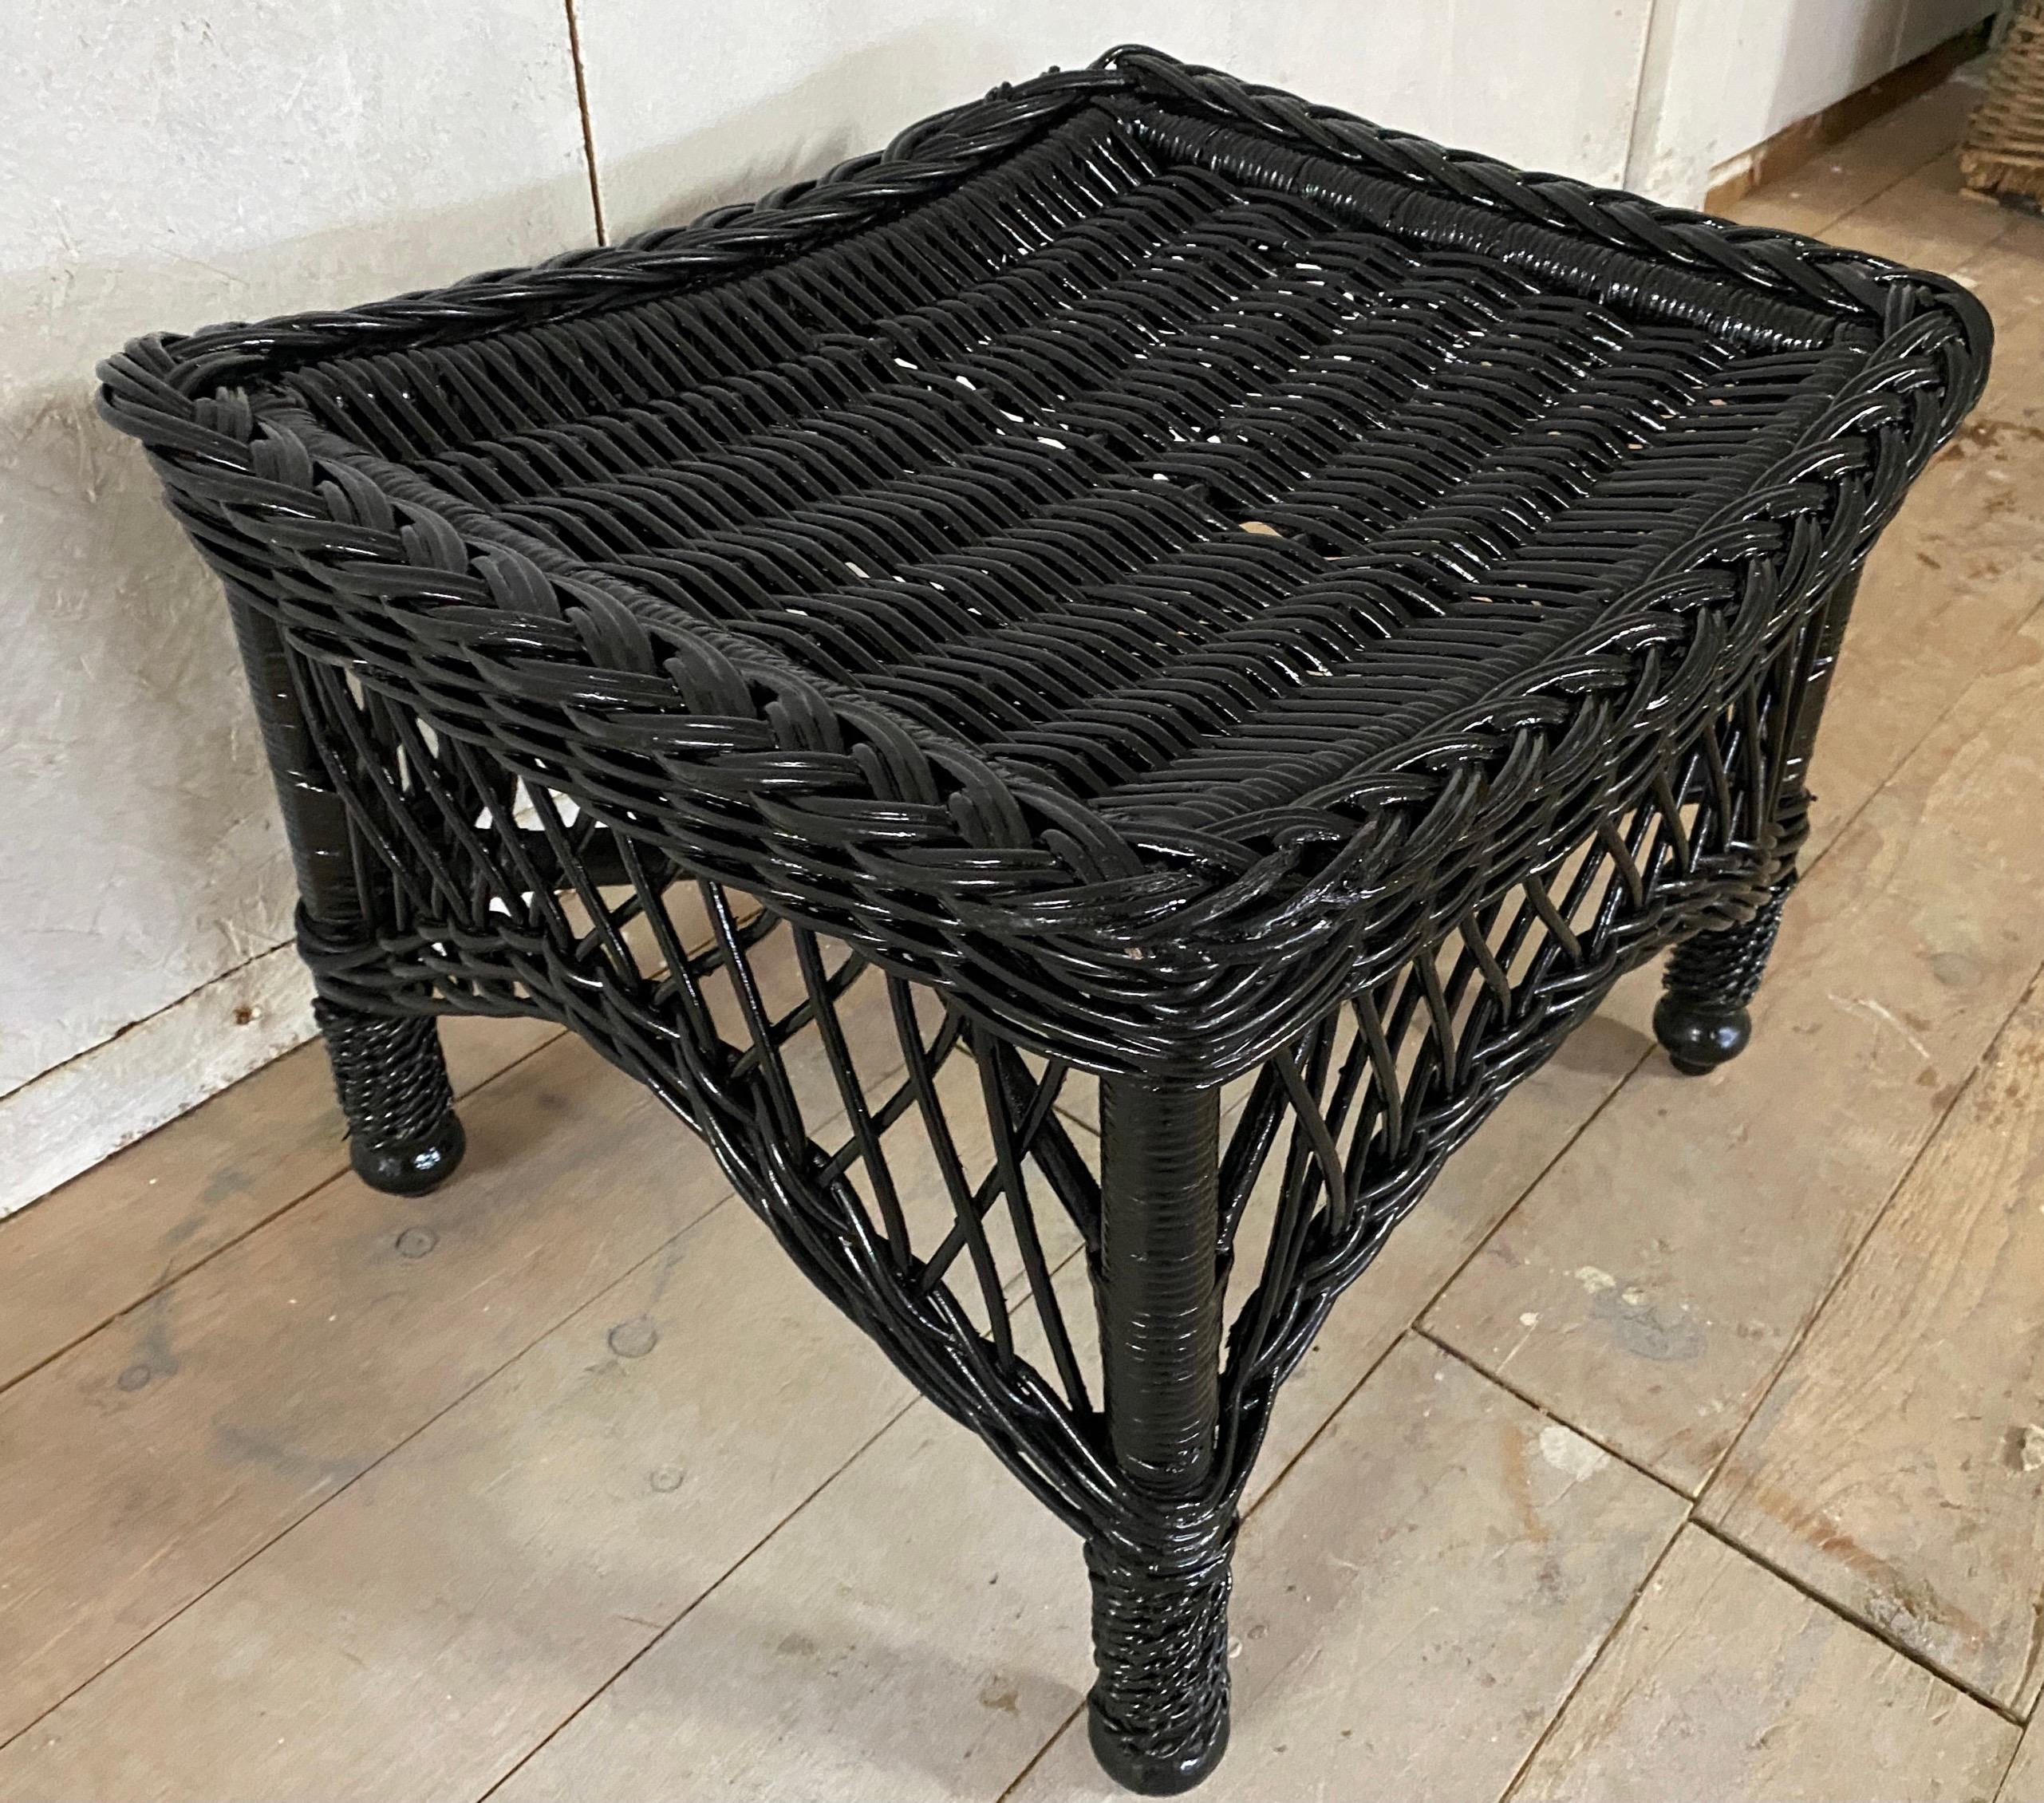 Hand-Woven Antique Black Painted Wicker Stool